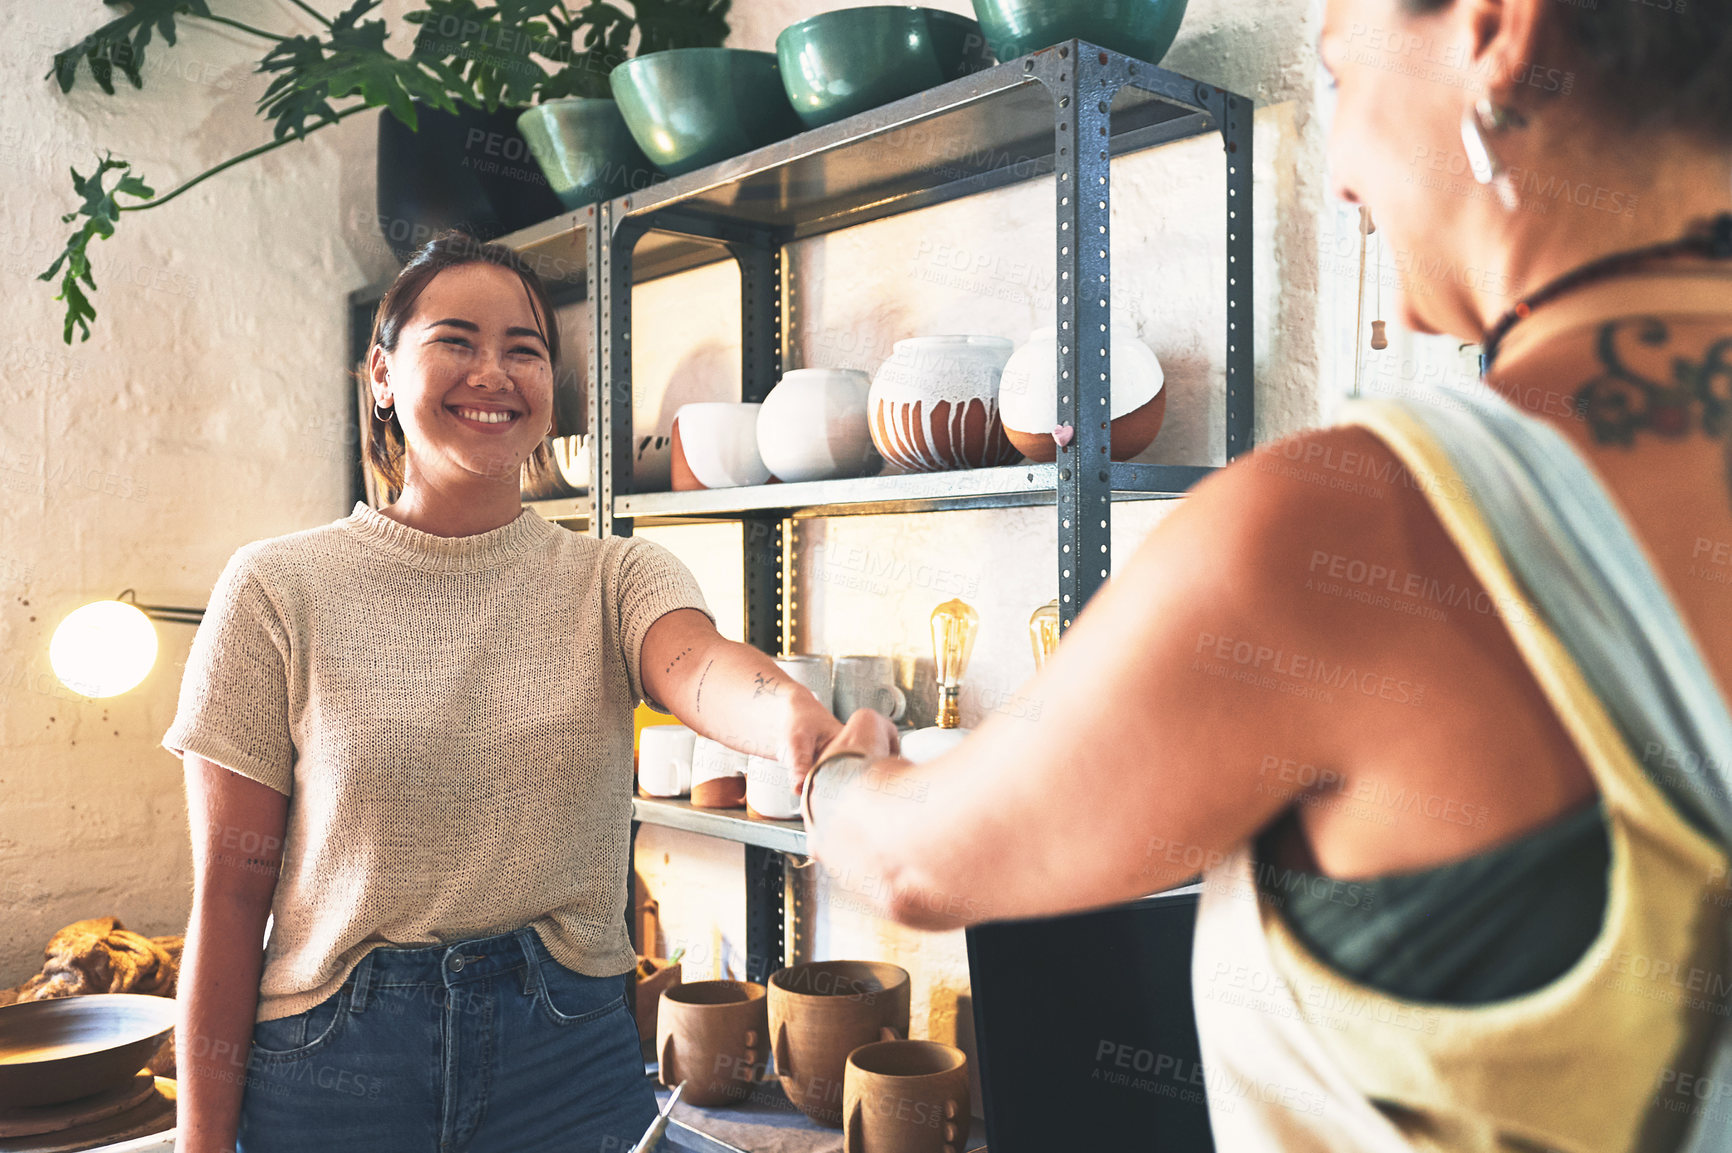 Buy stock photo Shot of two young women shaking hands in a pottery studio